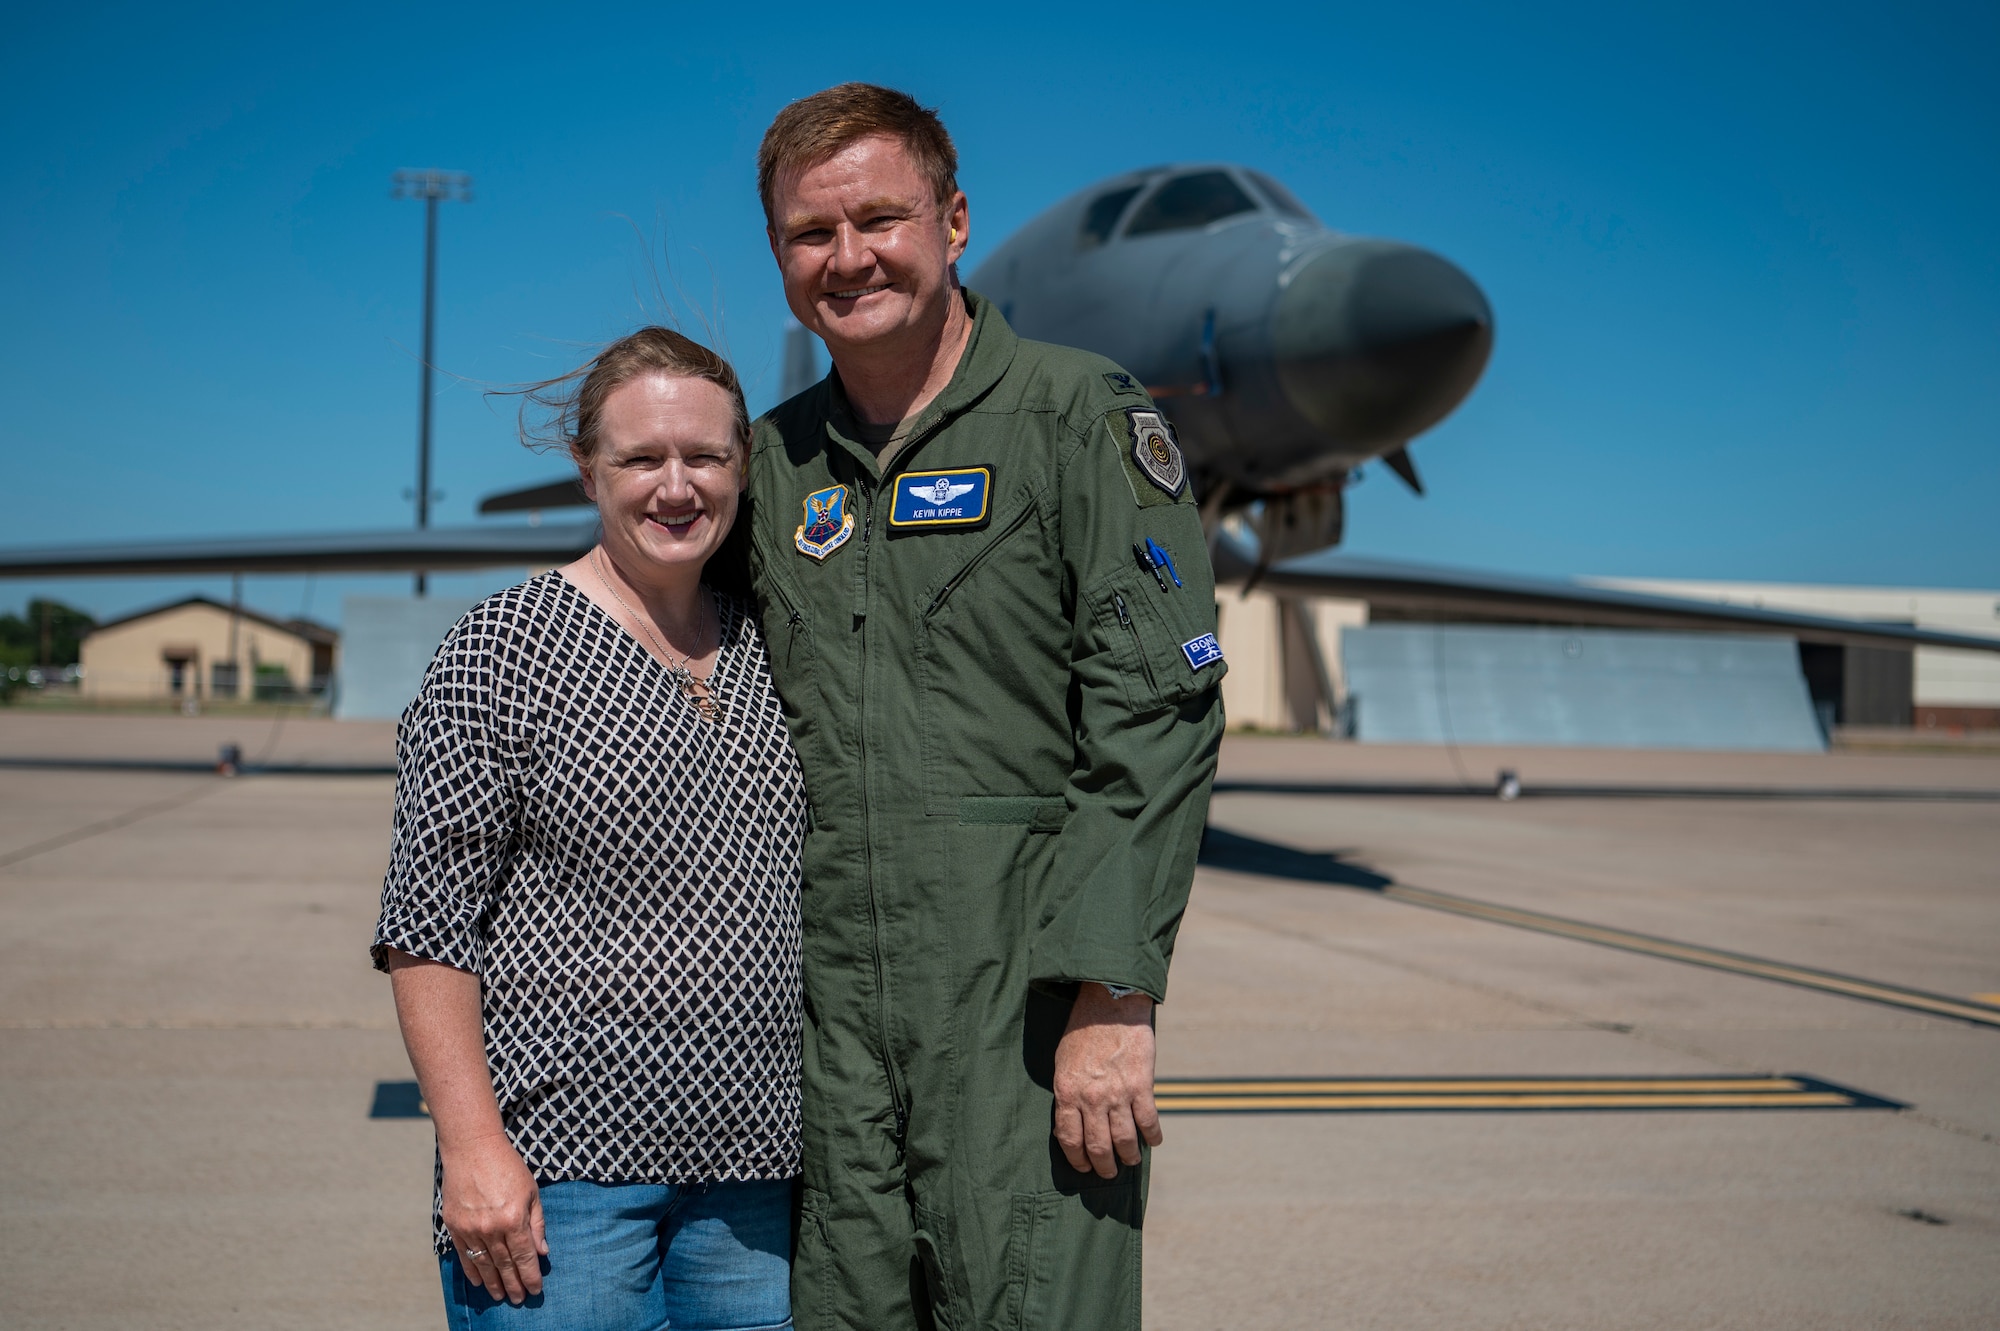 U.S. Air Force Col. Kevin Kippie, 7th Bomb Wing vice commander, and his wife Kathleen Kippie pose for a photo at Dyess Air Force Base, Texas, June 29, 2023. Kippie served at Dyess from June 11, 2021, to June 16, 2023. While at Dyess, Kippie was committed to excellence as he fostered financial innovation and proposals for the installation, created a Wing Welcome Center for new Airmen and worked in integrated teams to action the wing’s fiscal efforts. (U.S. Air Force photo by Senior Airman Ryan Hayman)